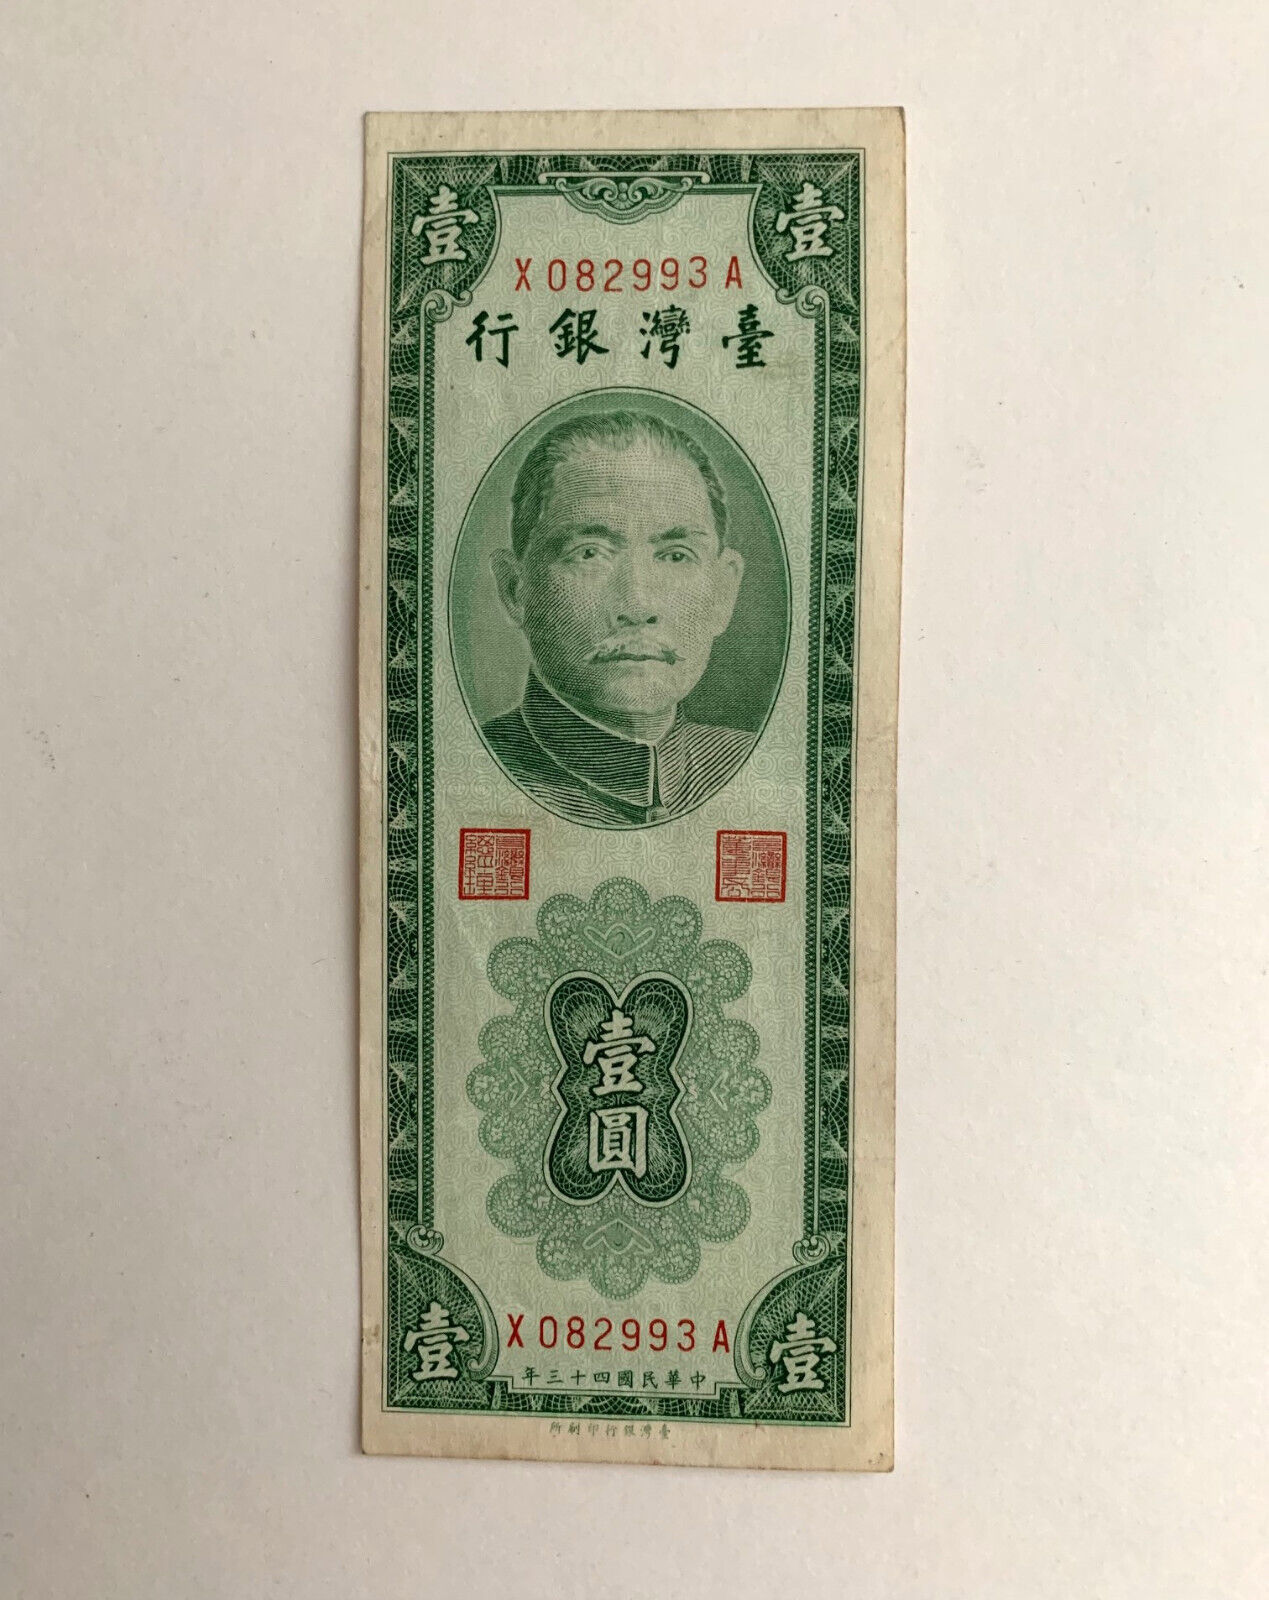 Primary image for 1954 Taiwan Vertical 1 Yuan Banknote